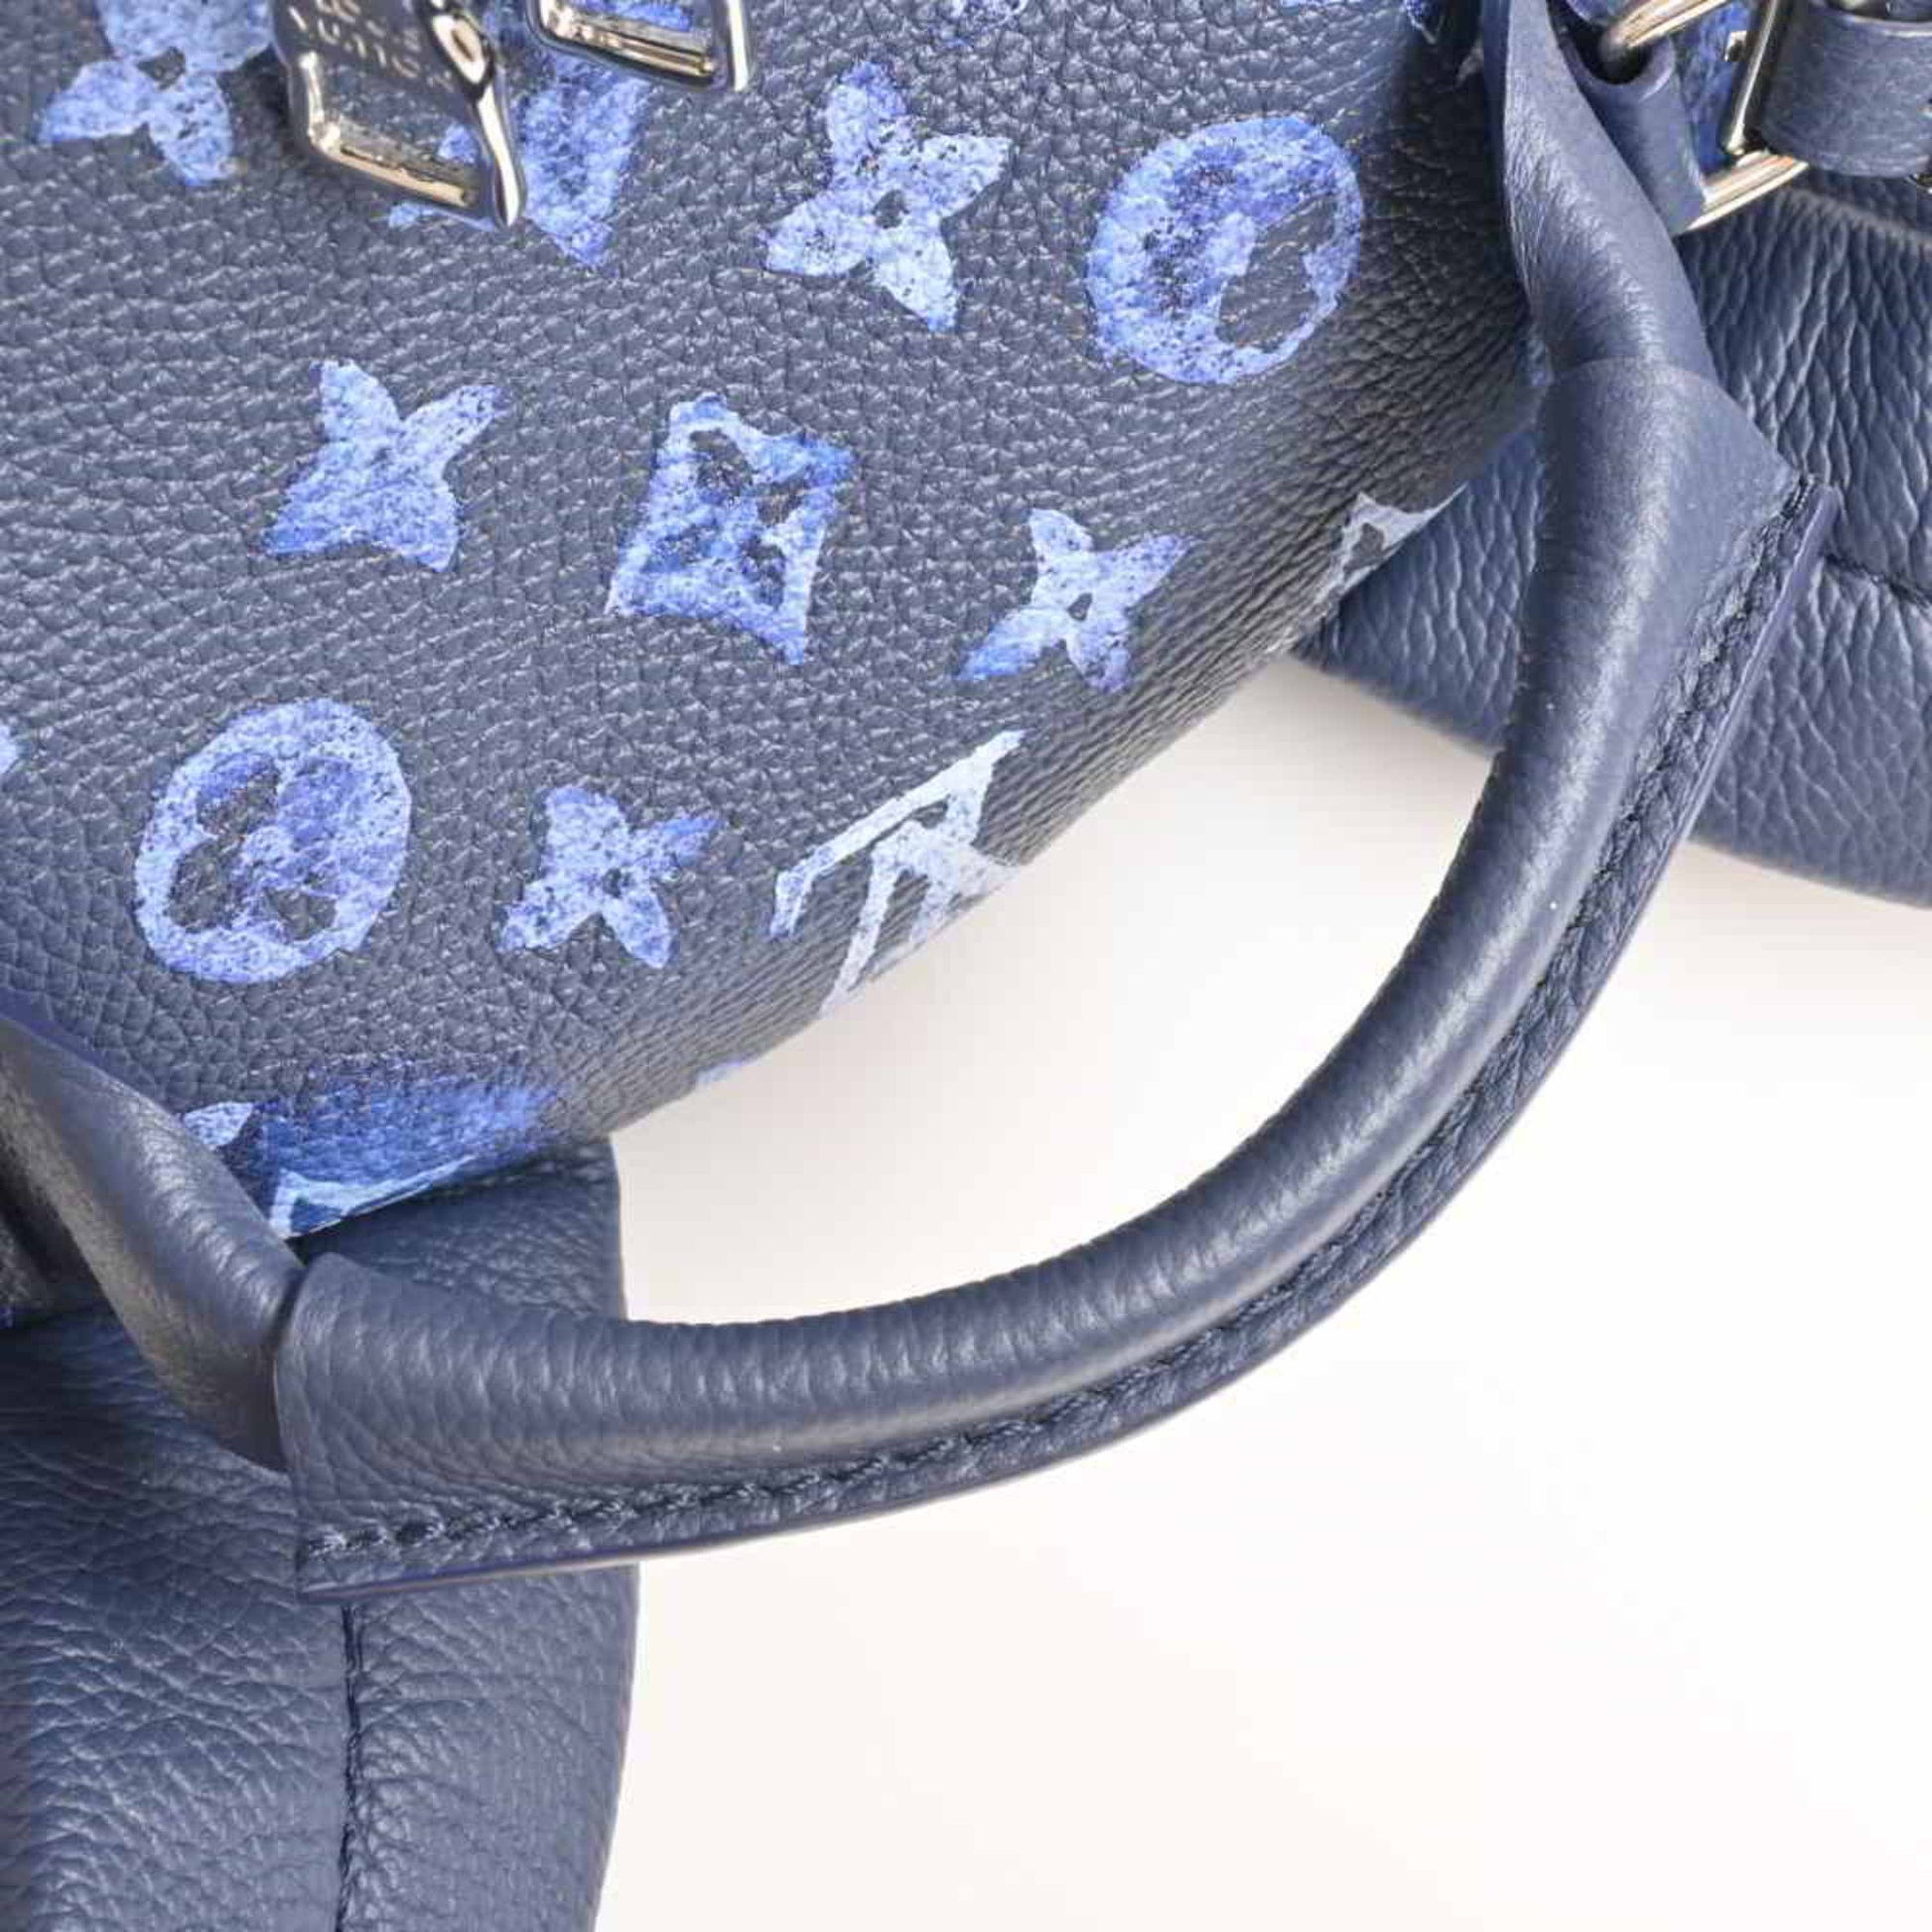 Leather backpack Louis Vuitton Blue in Leather - 36486960